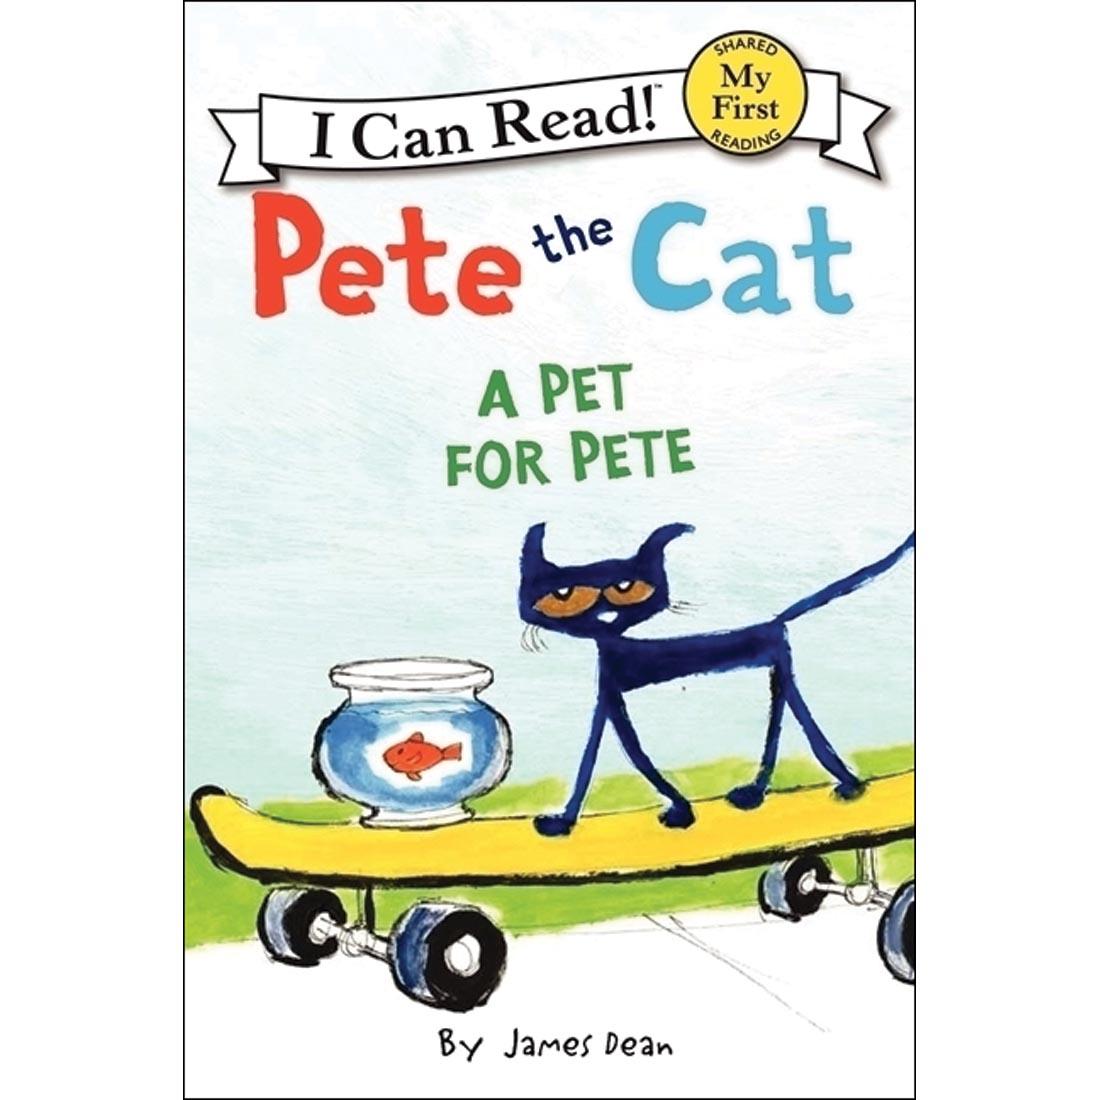 Pete The Cat: A Pet For Pete - A My First I Can Read Book, Shared Reading